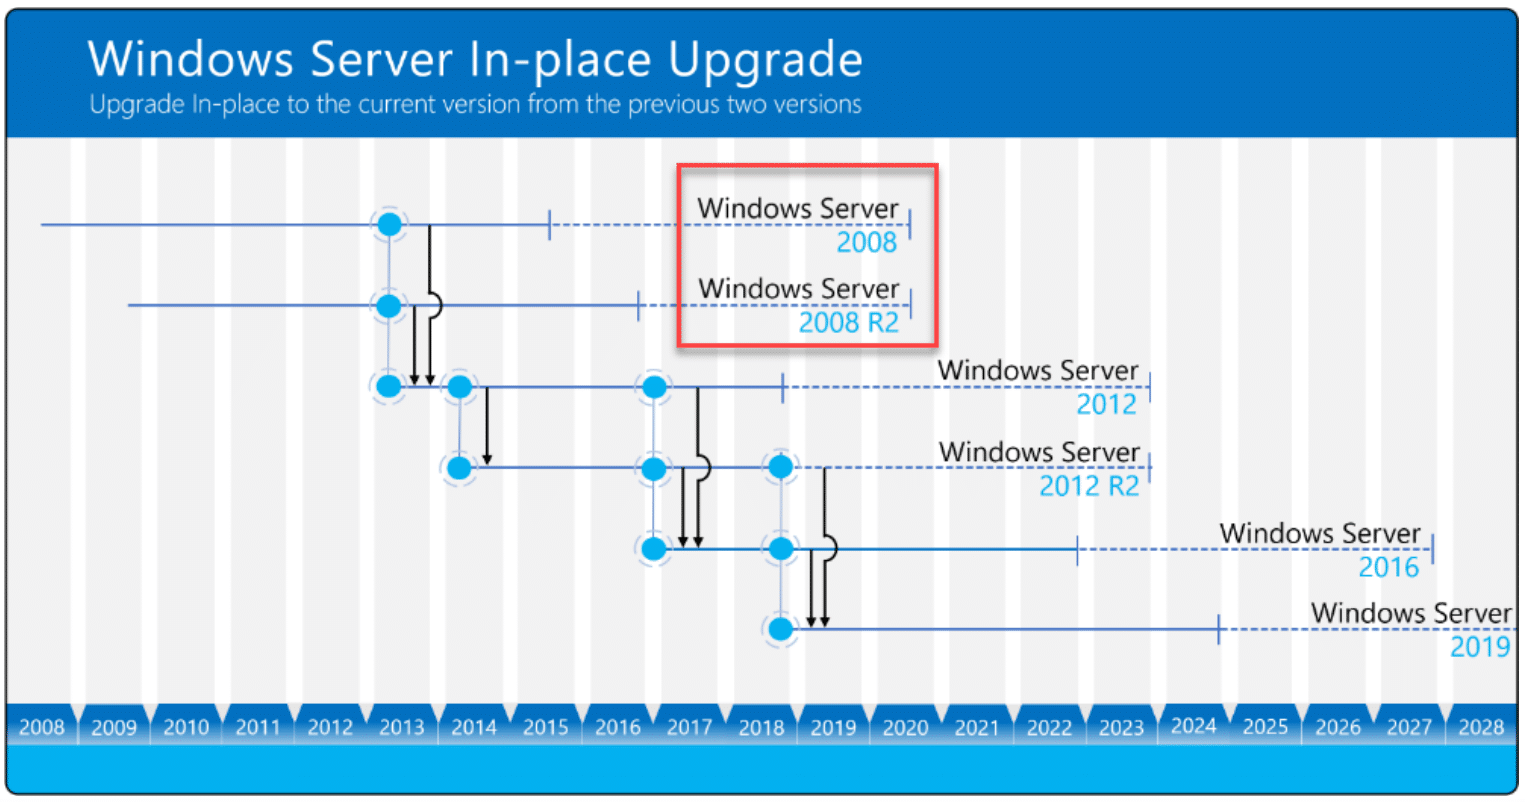 Windows Server 2008 End of Life: Supported in-place upgrades for various Windows Server operating systems (Image courtesy of Microsoft)